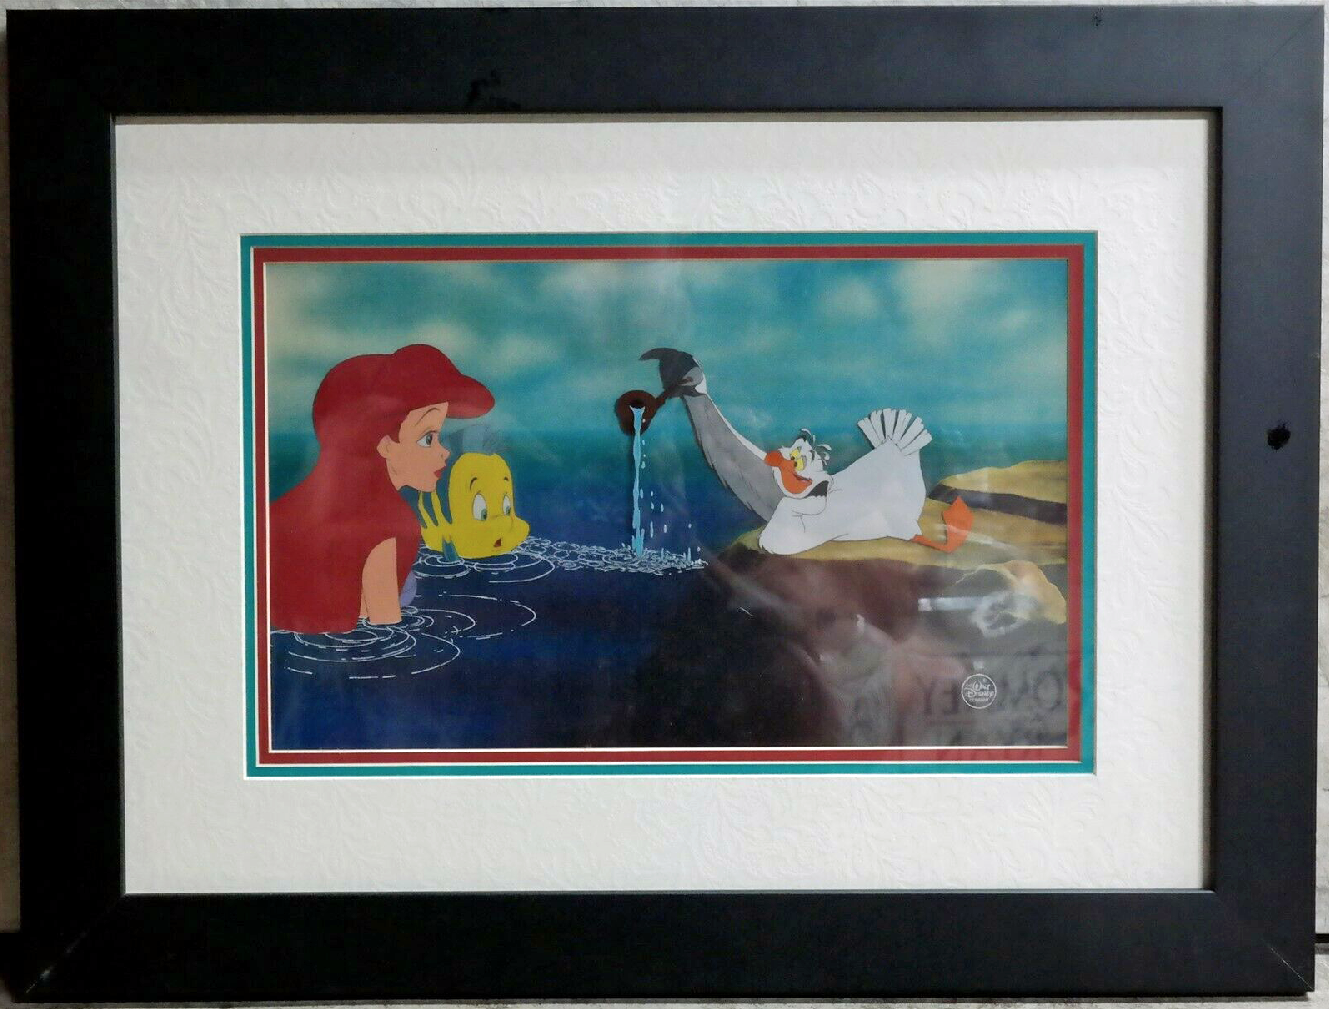 Original Walt Disney Production Cel from The Little Mermaid featuring Ariel, Flounder and Scuttle